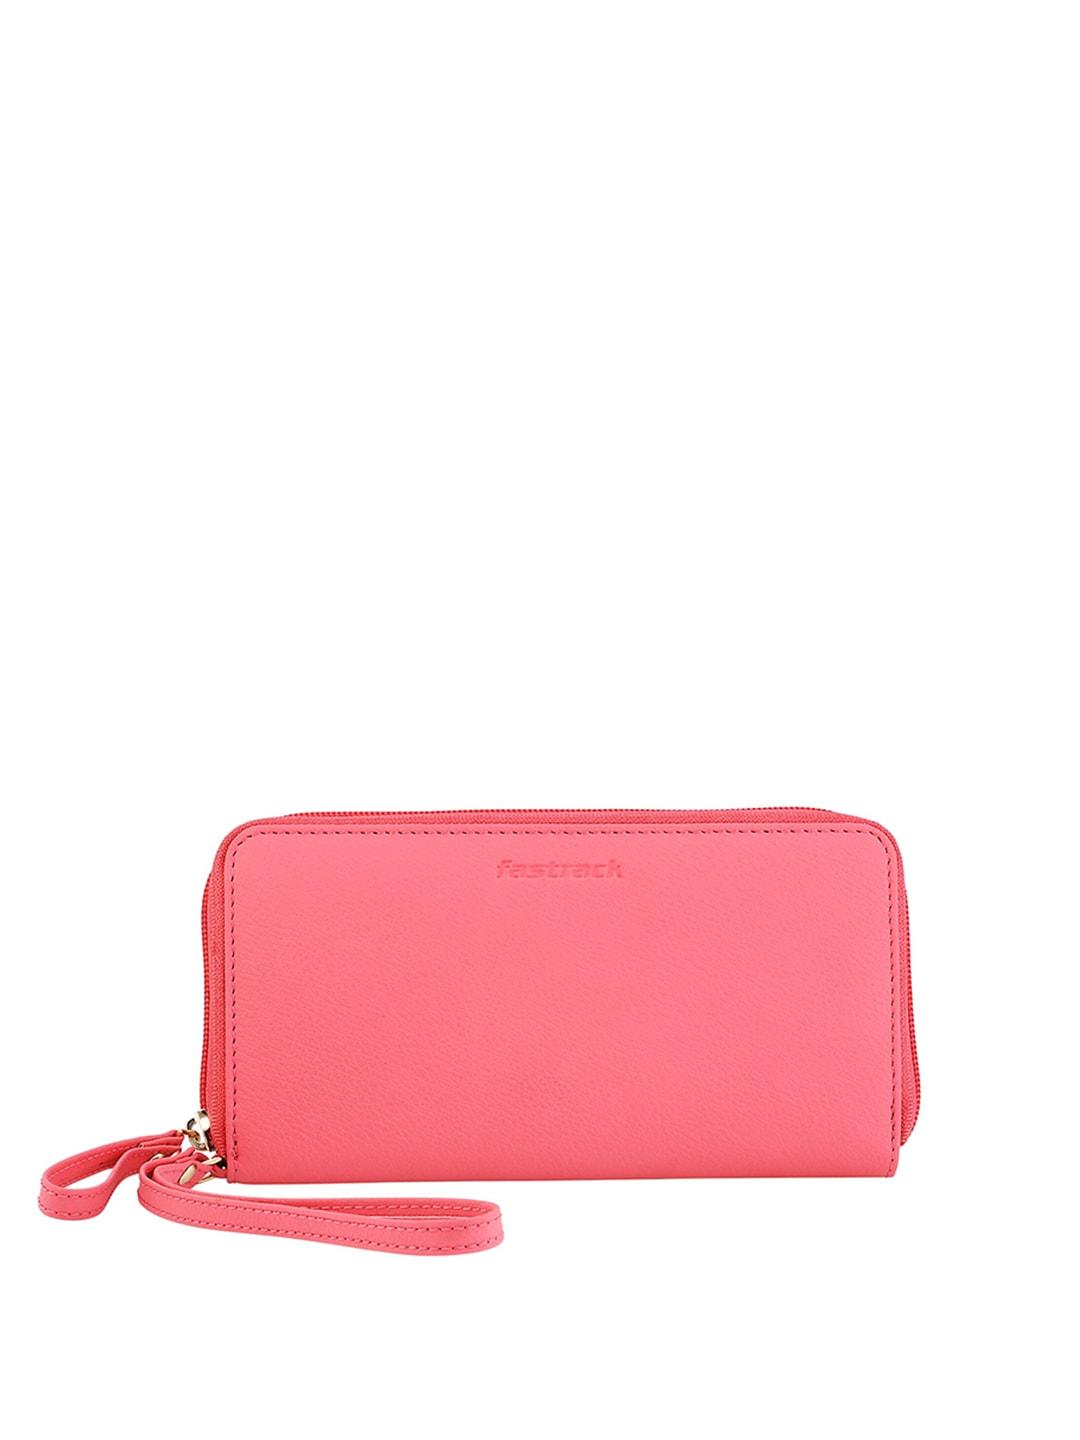 fastrack-pu-purse-clutch-with-zip-detail